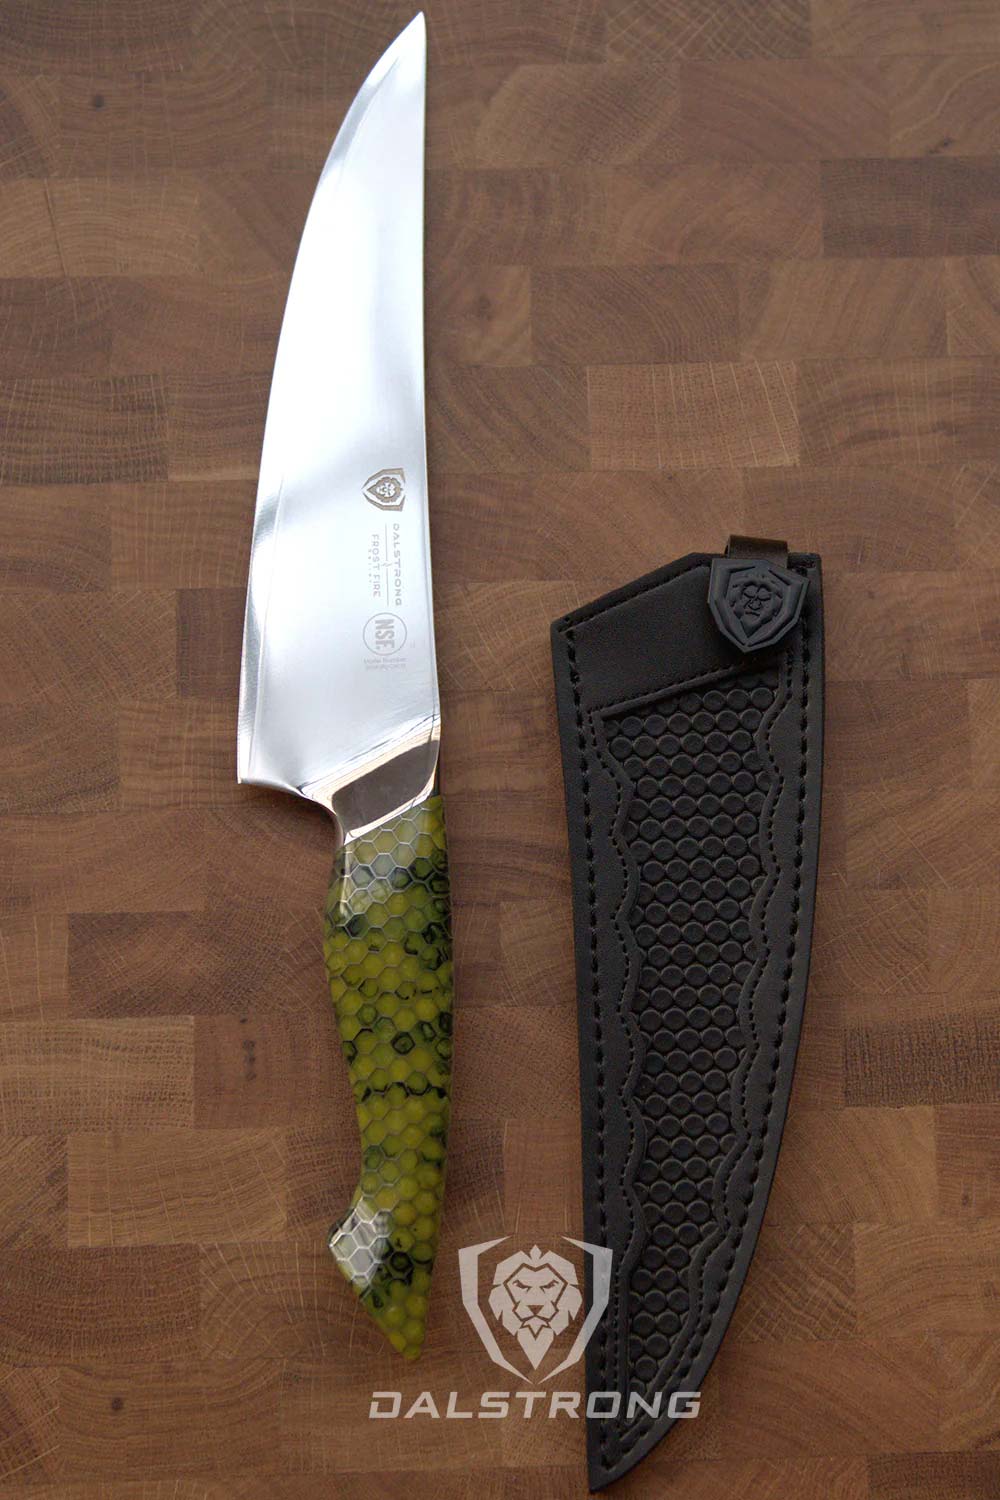 Dalstrong frost fire series 8 inch chef knife with dragon skin handle and black sheath inside on a wooden board.